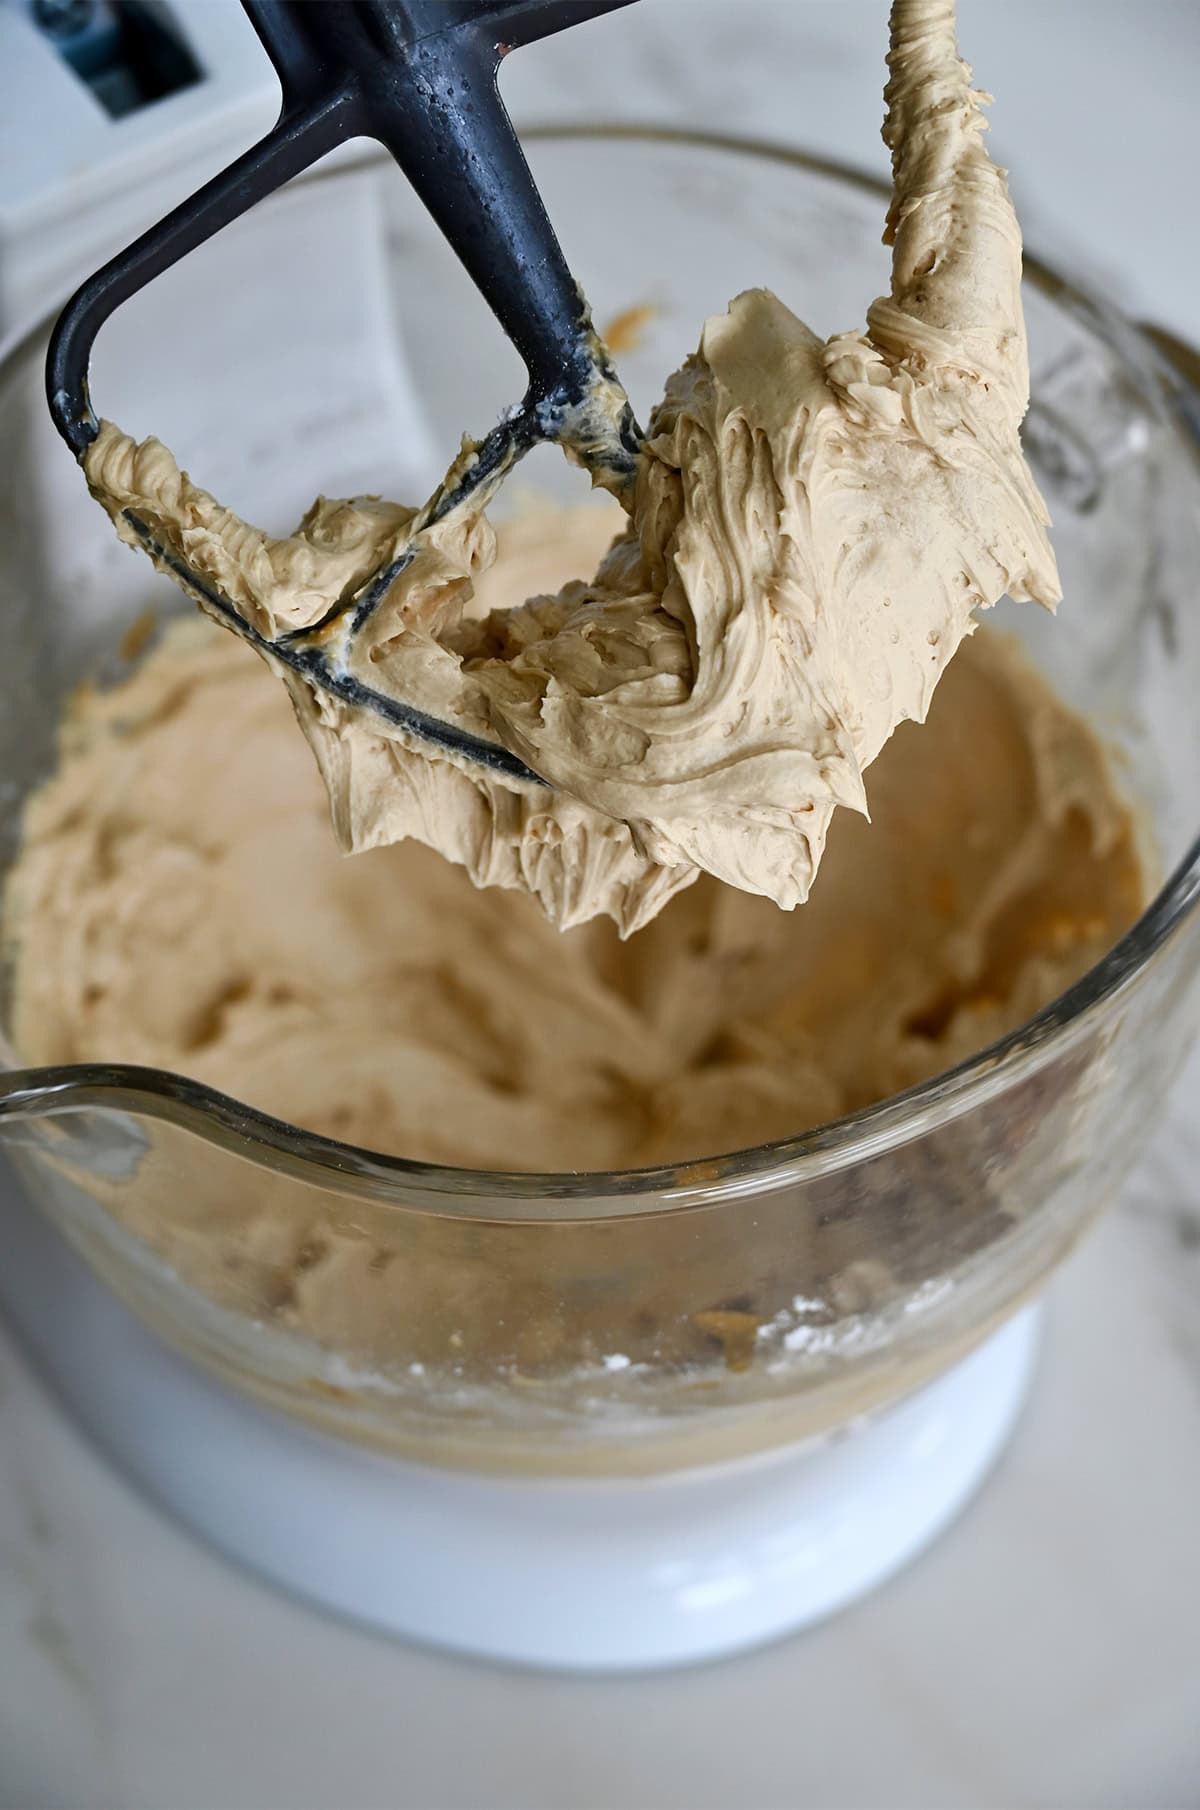 Silky smooth coffee buttercream frosting covering the paddle attachment of a stand mixer.